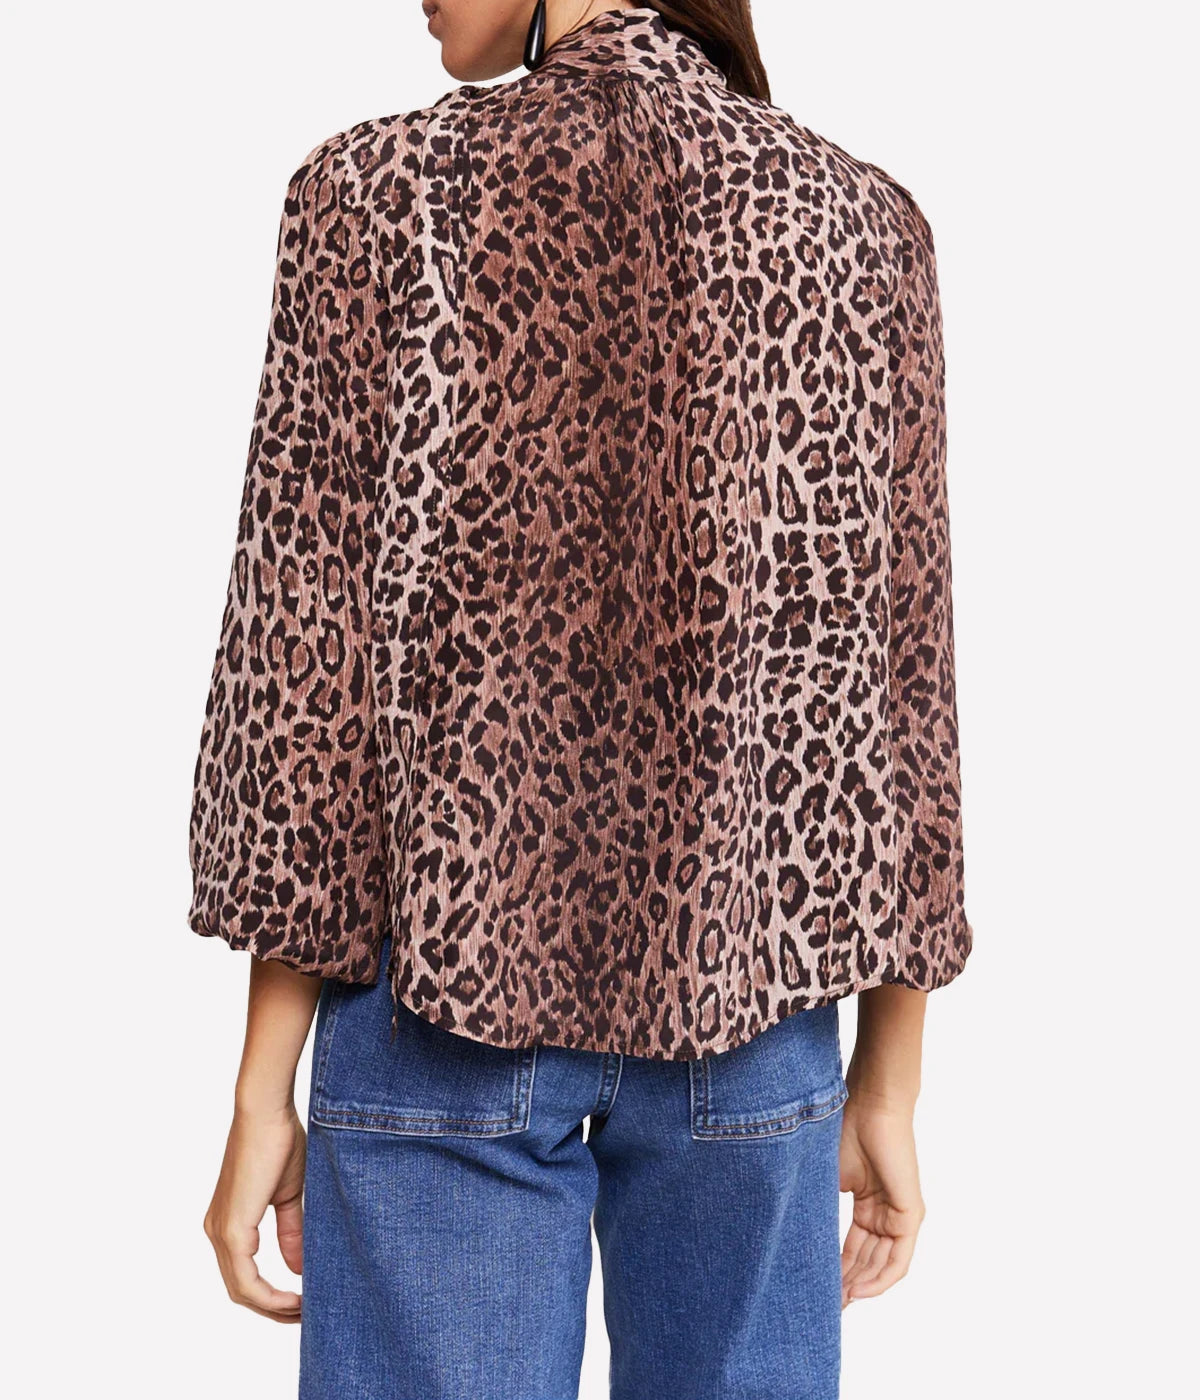 Your go to top, Rixo’s blouse inspired by supermodel Kate Moss, this Silk crepe de Chine   Is a crowd pleaser. Wear with a skirt, pants or jeans, this seventies inspired silk leopard print top will be a go to closet item.  